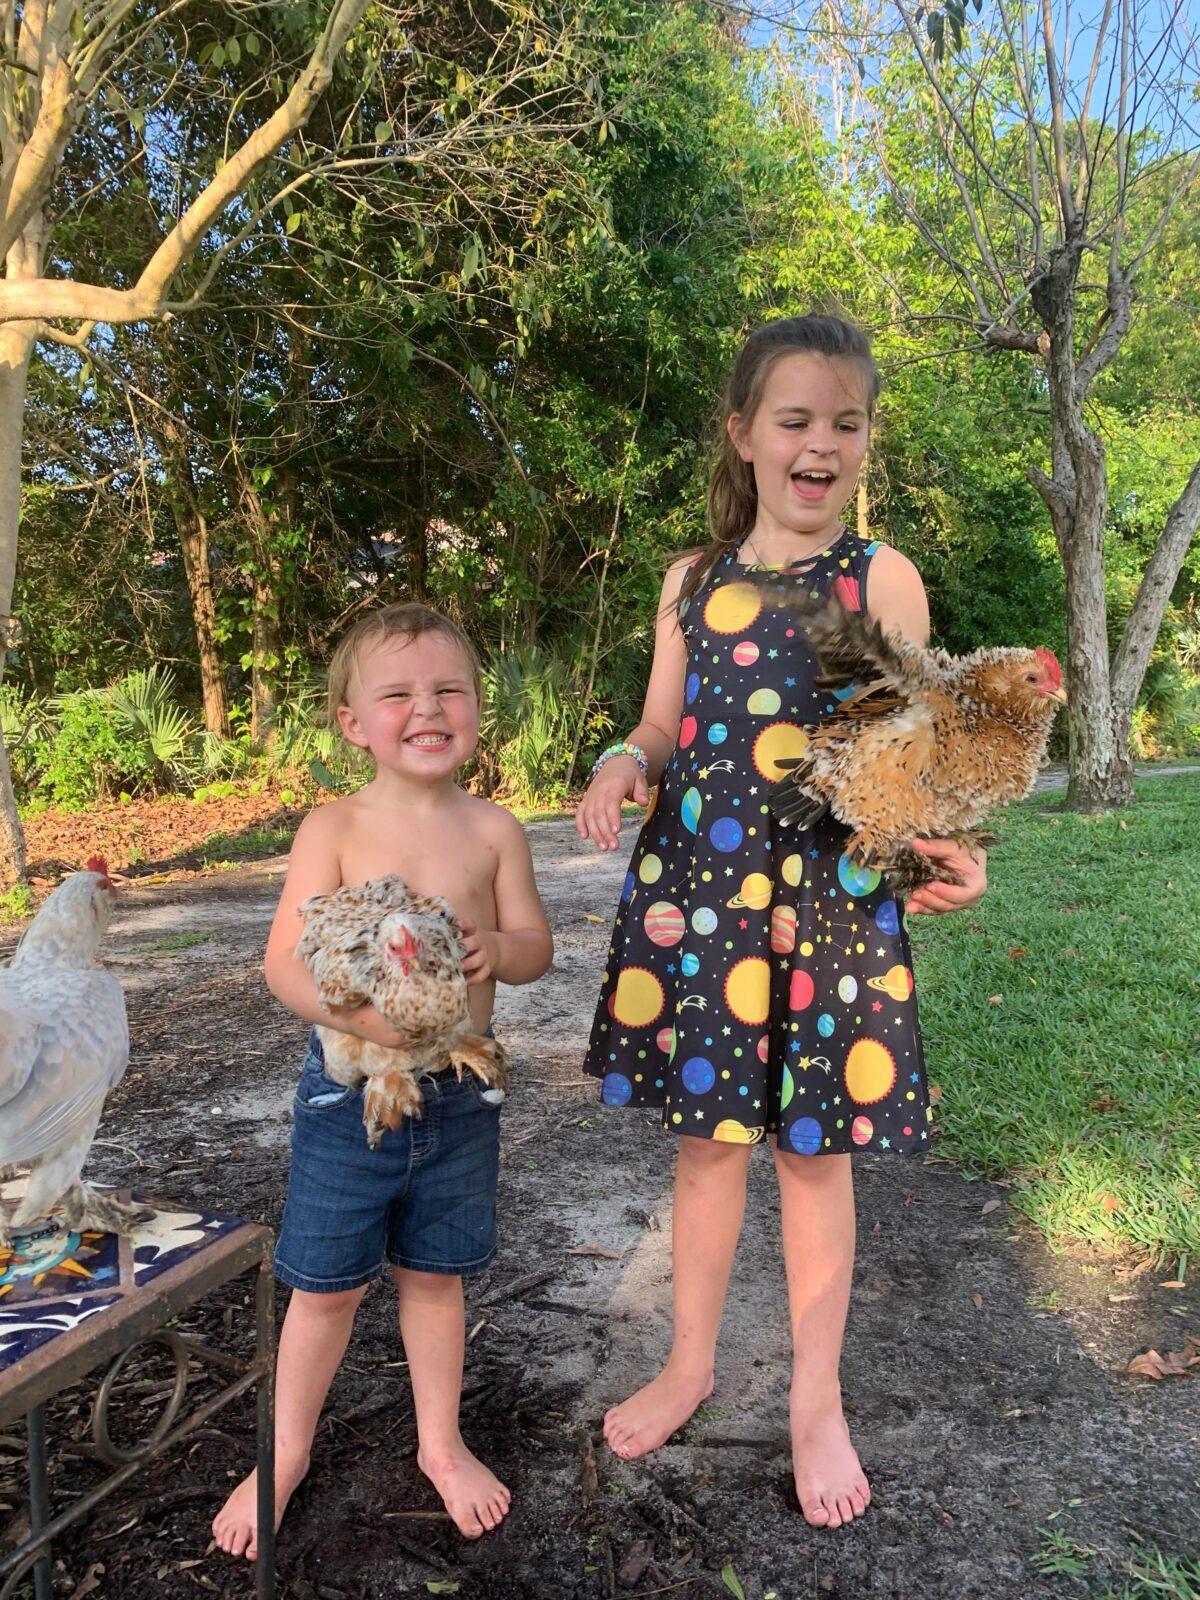 Lexi Smith's children hold their favorite pet chickens. Emmett, 3, has an ornamental breed called a calico princess. Madilyn, 9, holds the equally beautiful breed called a frizzle. (Courtesy of Lexi Smith)